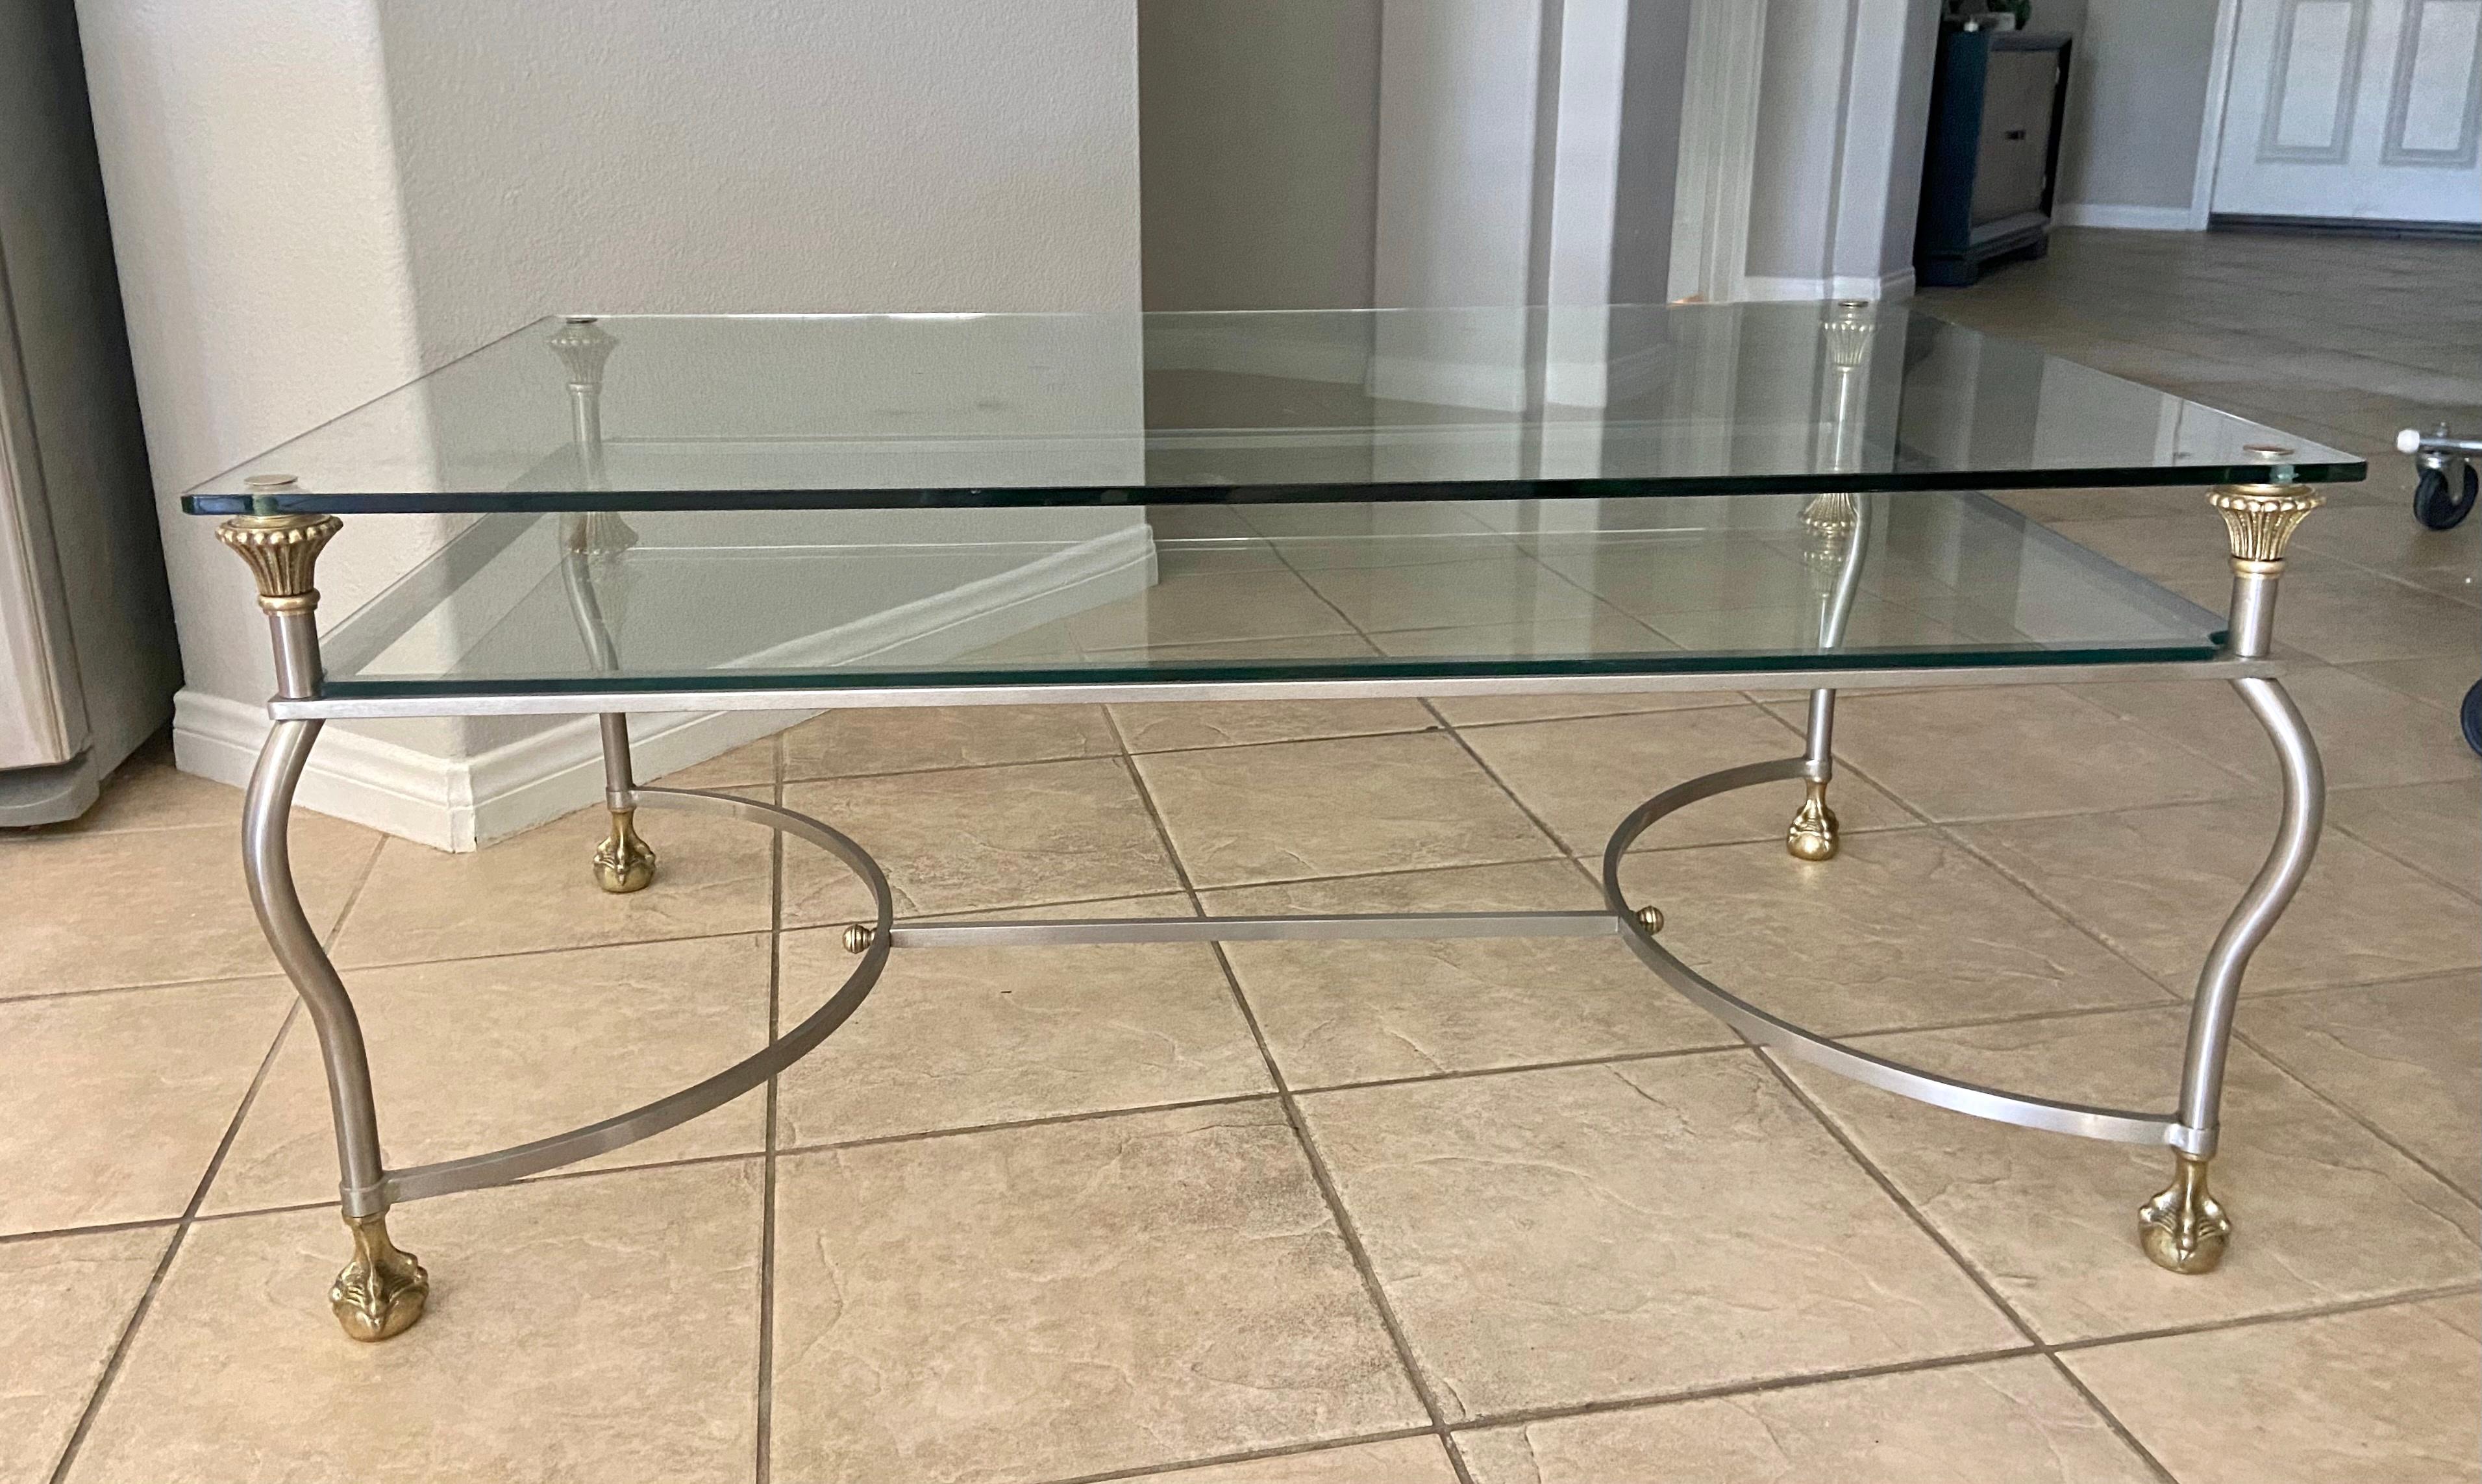 Italian made steel and brass two tier glass inset cocktail table with claw feet detailing. The well constructed table shape is rectangle with nicely detailed brass fittings. Stamped on foot 